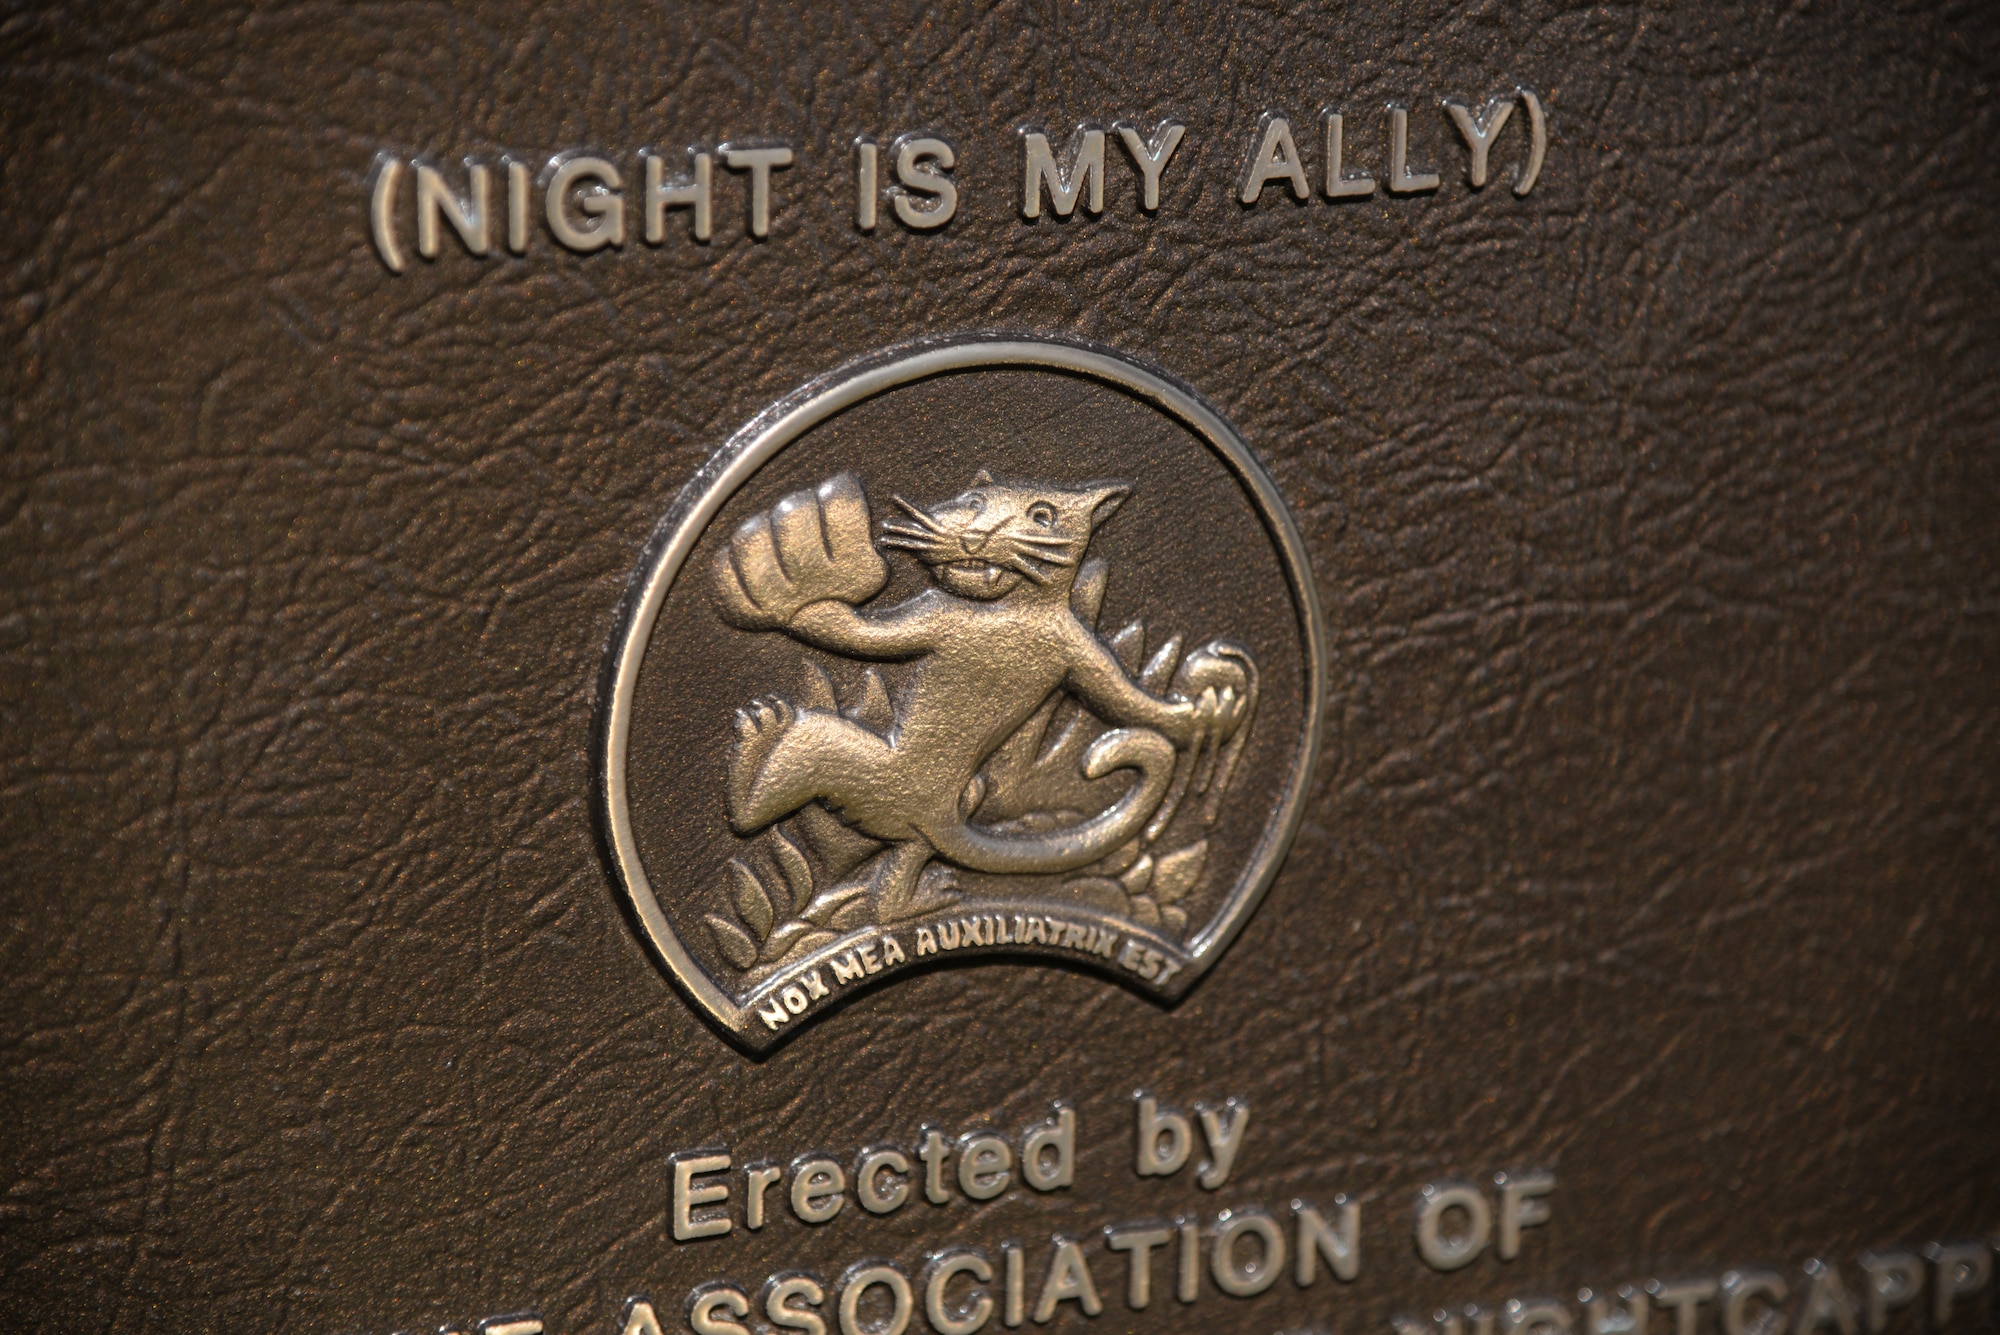 A picture of a close up view of the bronze plaque on a U.S. Navy VC-4 memorial marker.